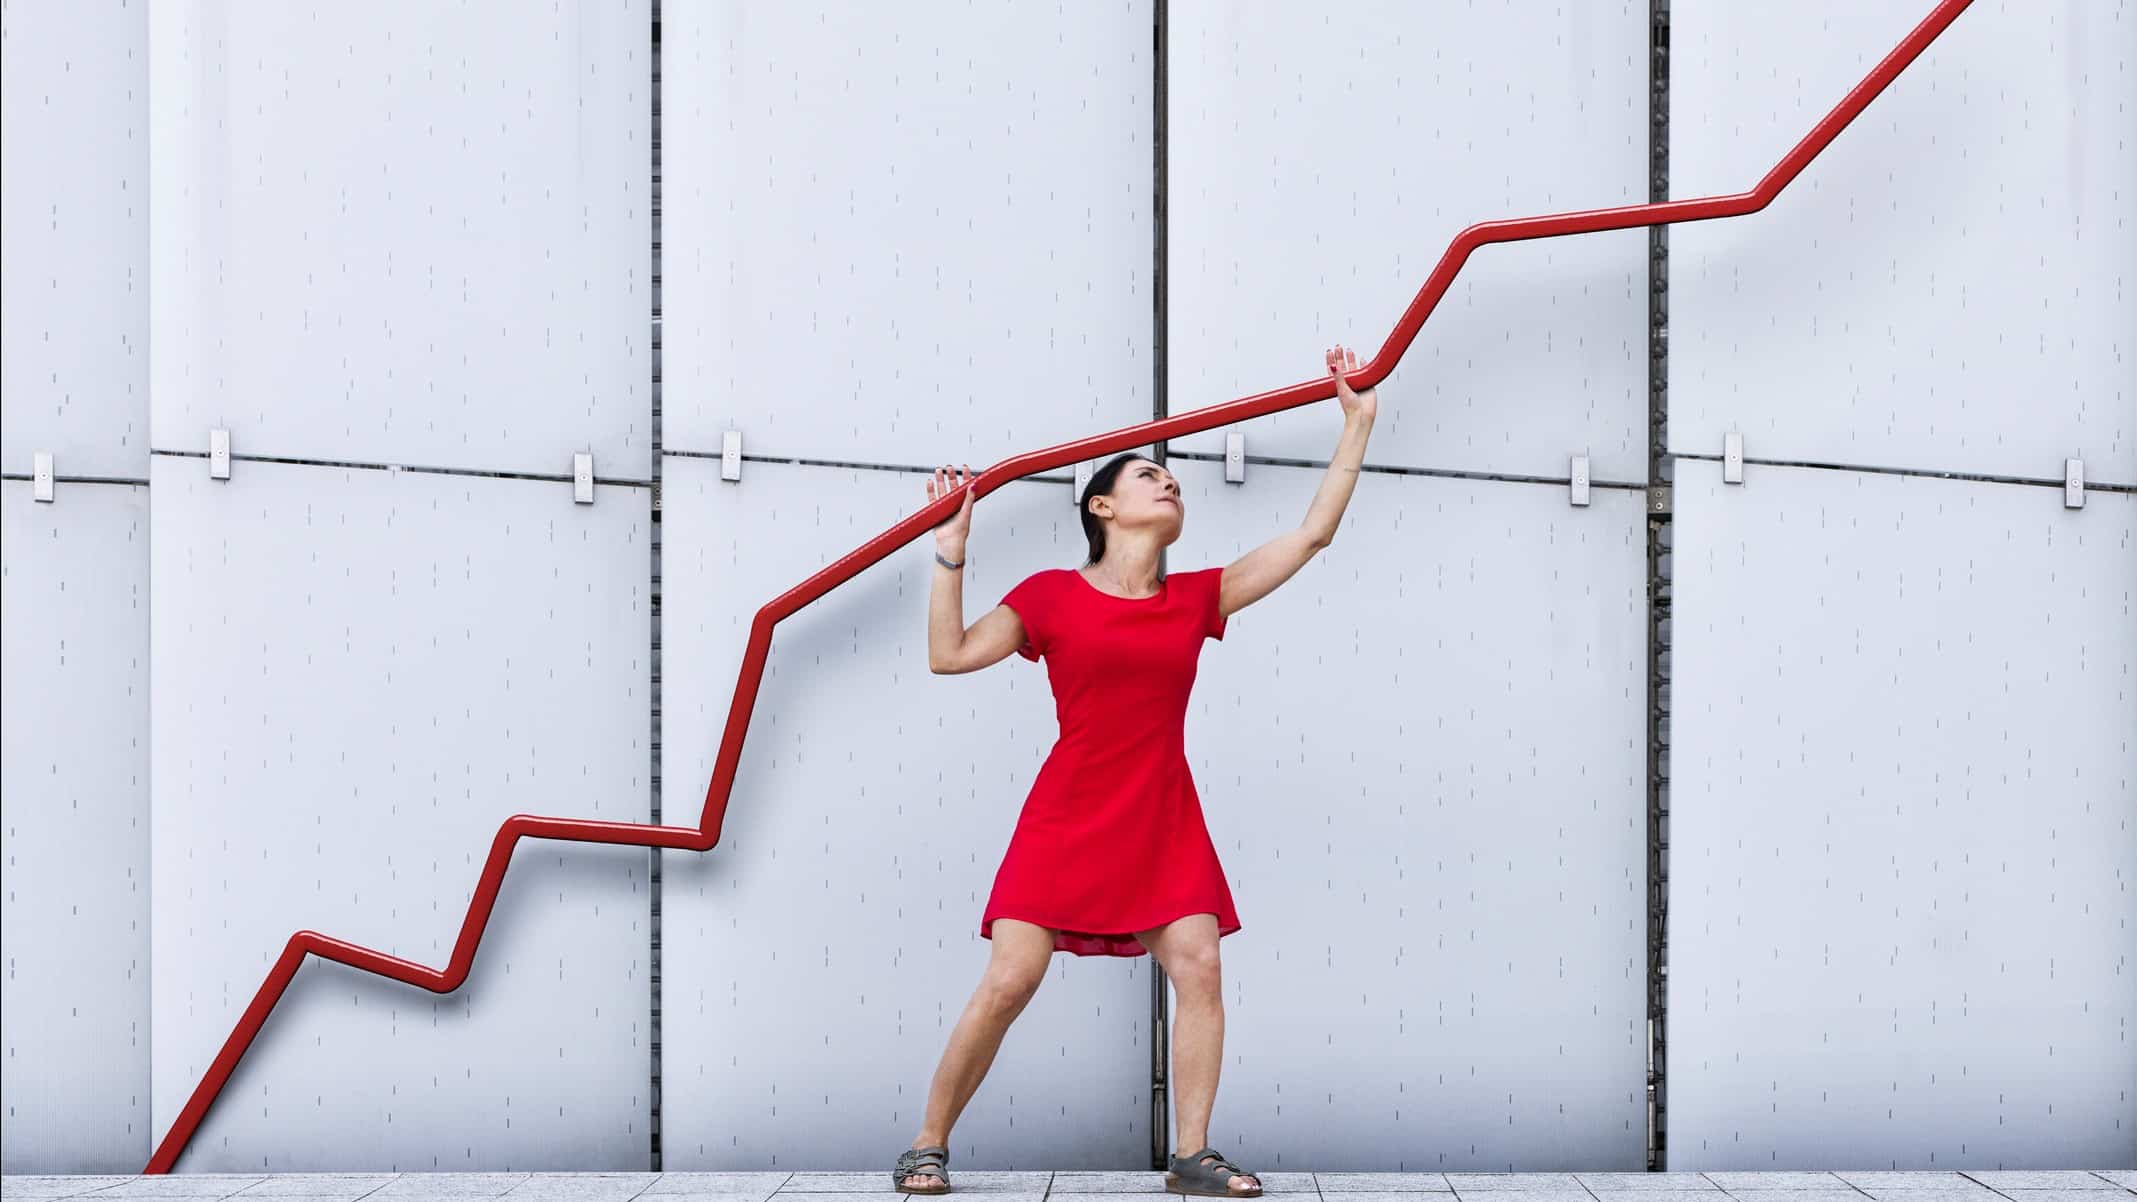 A woman in a red dress holding up a red graph.